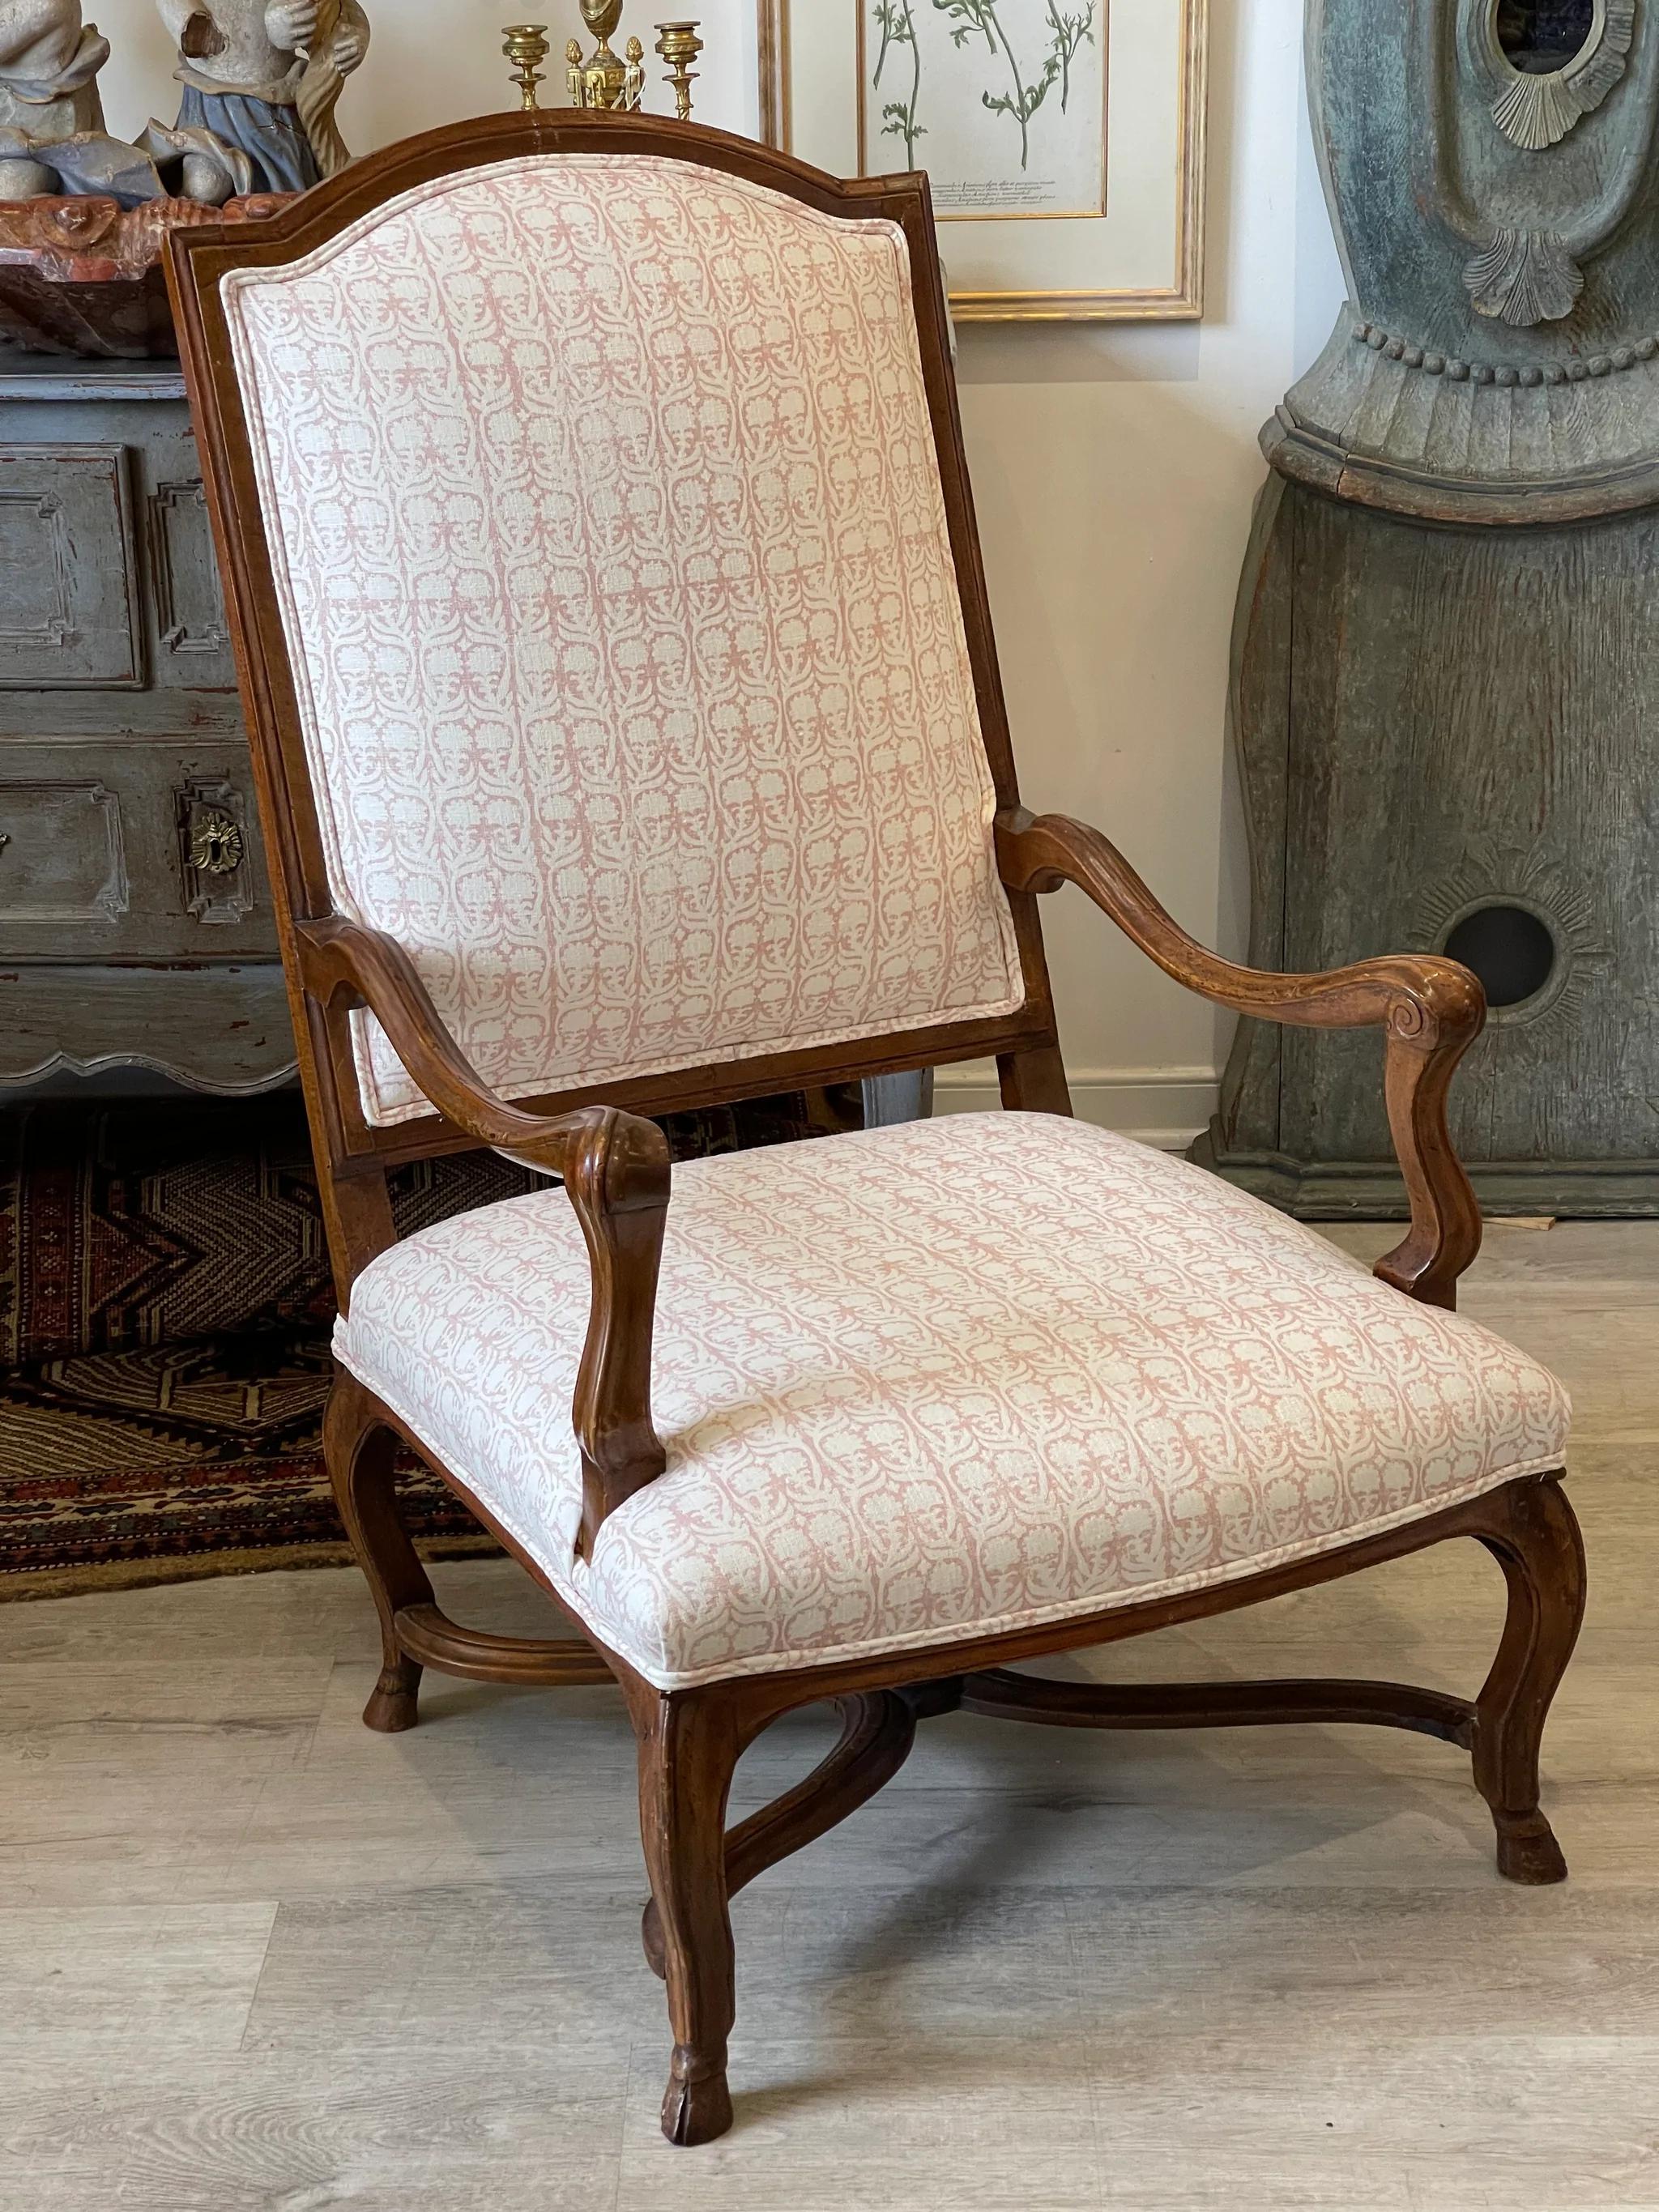 French Provincial Walnut Fauteuil a la Reine, arm chair, 18th century, with an arched back crest, down-swept arms and raised on cabriole legs ending in hoof feet, of pegged construction. Upholstered in hand-blocked fabric by Penny Morrison.